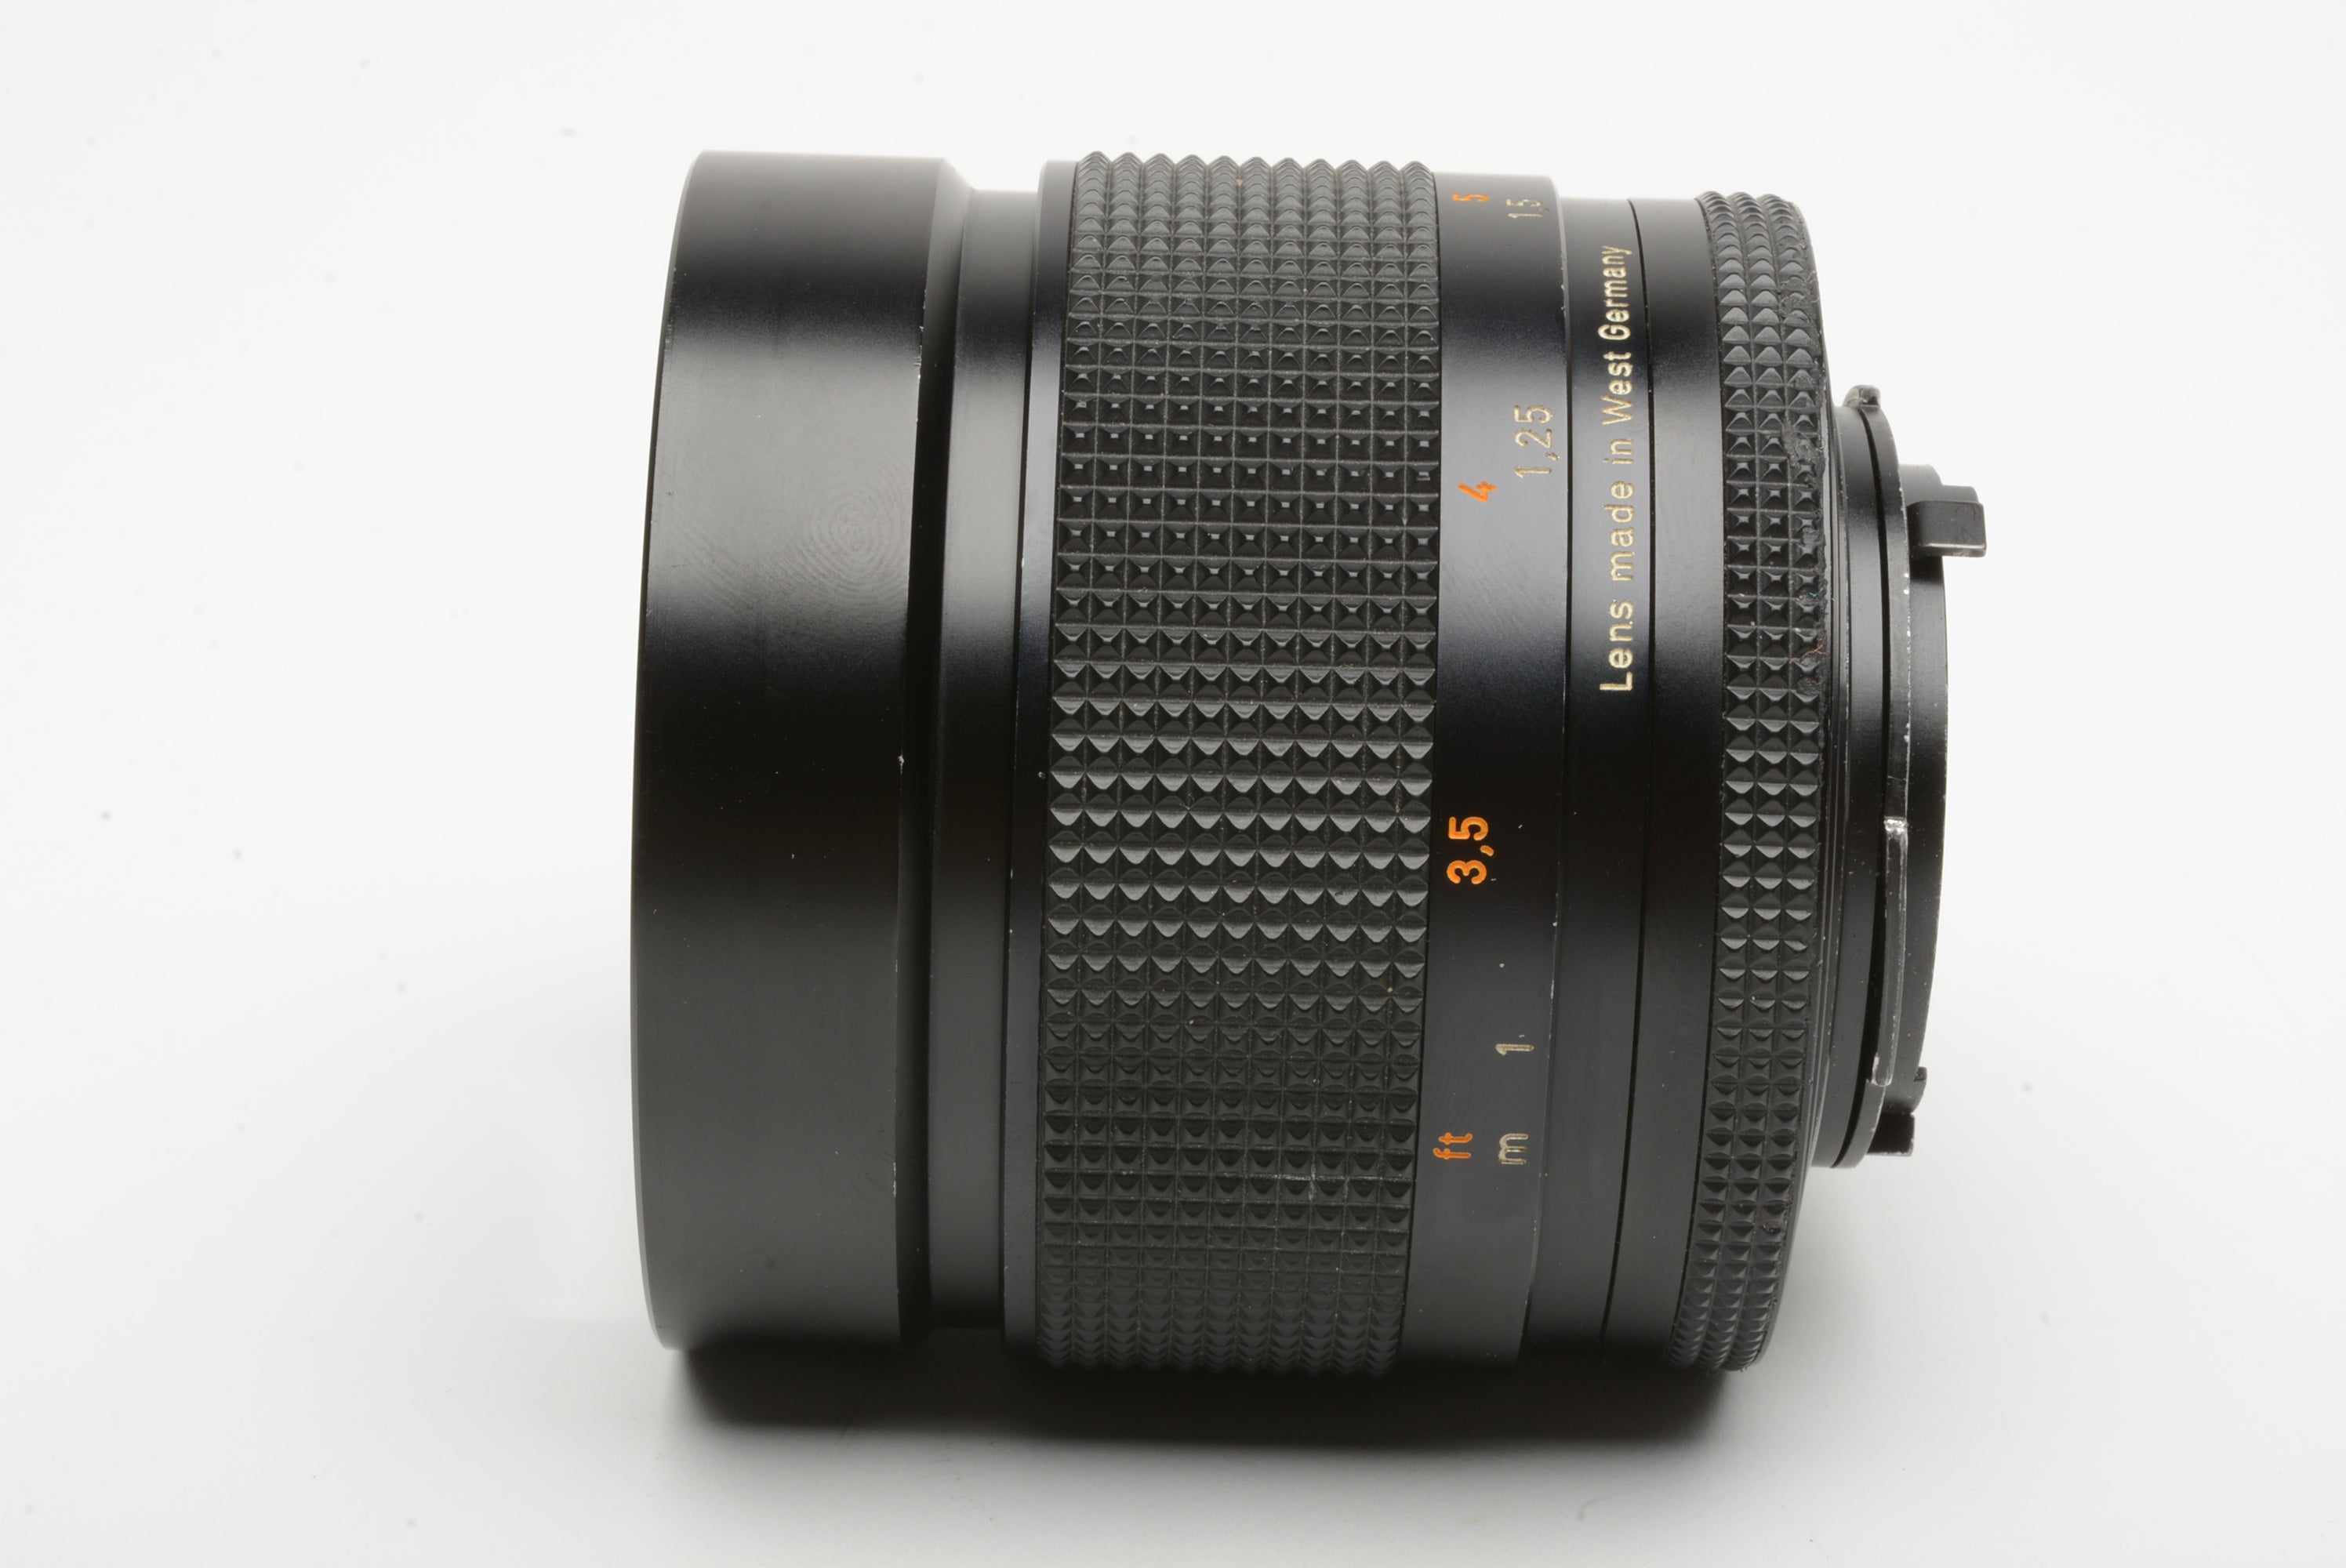 Contax Planar 85mm f1.4 AEG T* lens for Contax/Yashica mount, caps